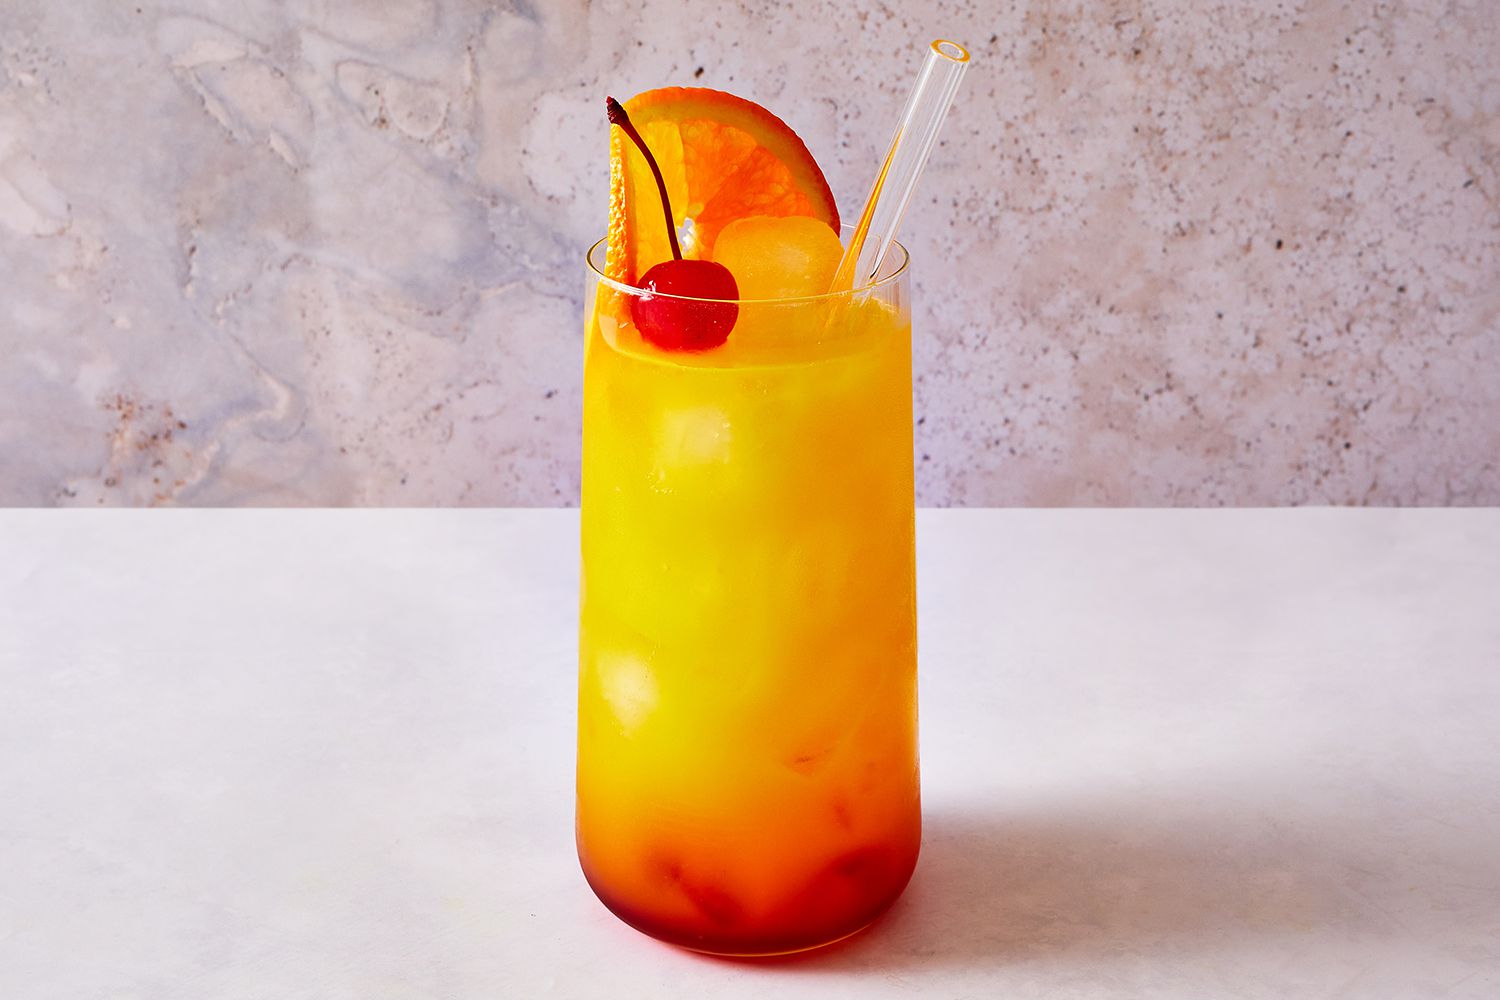 Tequila sunrise cocktail garnished with an orange slice and a cherry